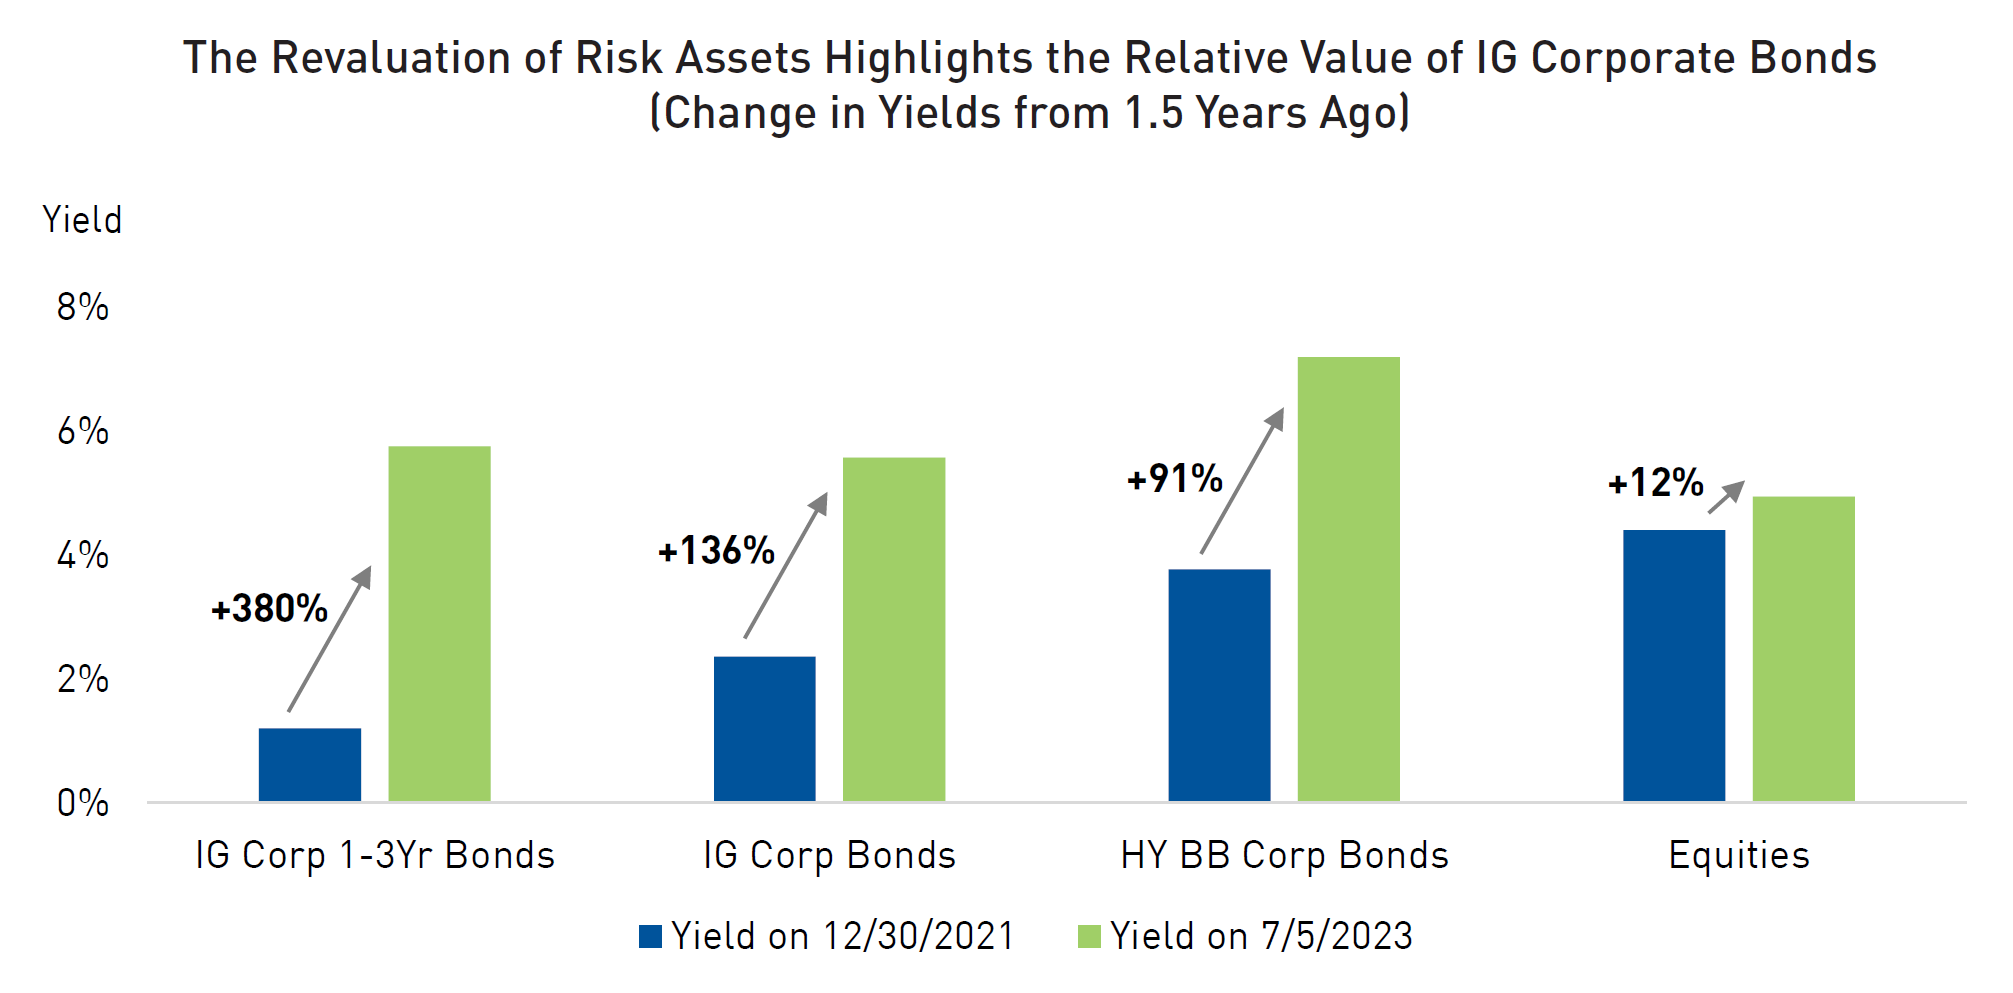 The Revaluation of Risk Assets Highlights the Relative Value of IG Corporate Bonds (Change in Yields from 1.5 Years Ago) 